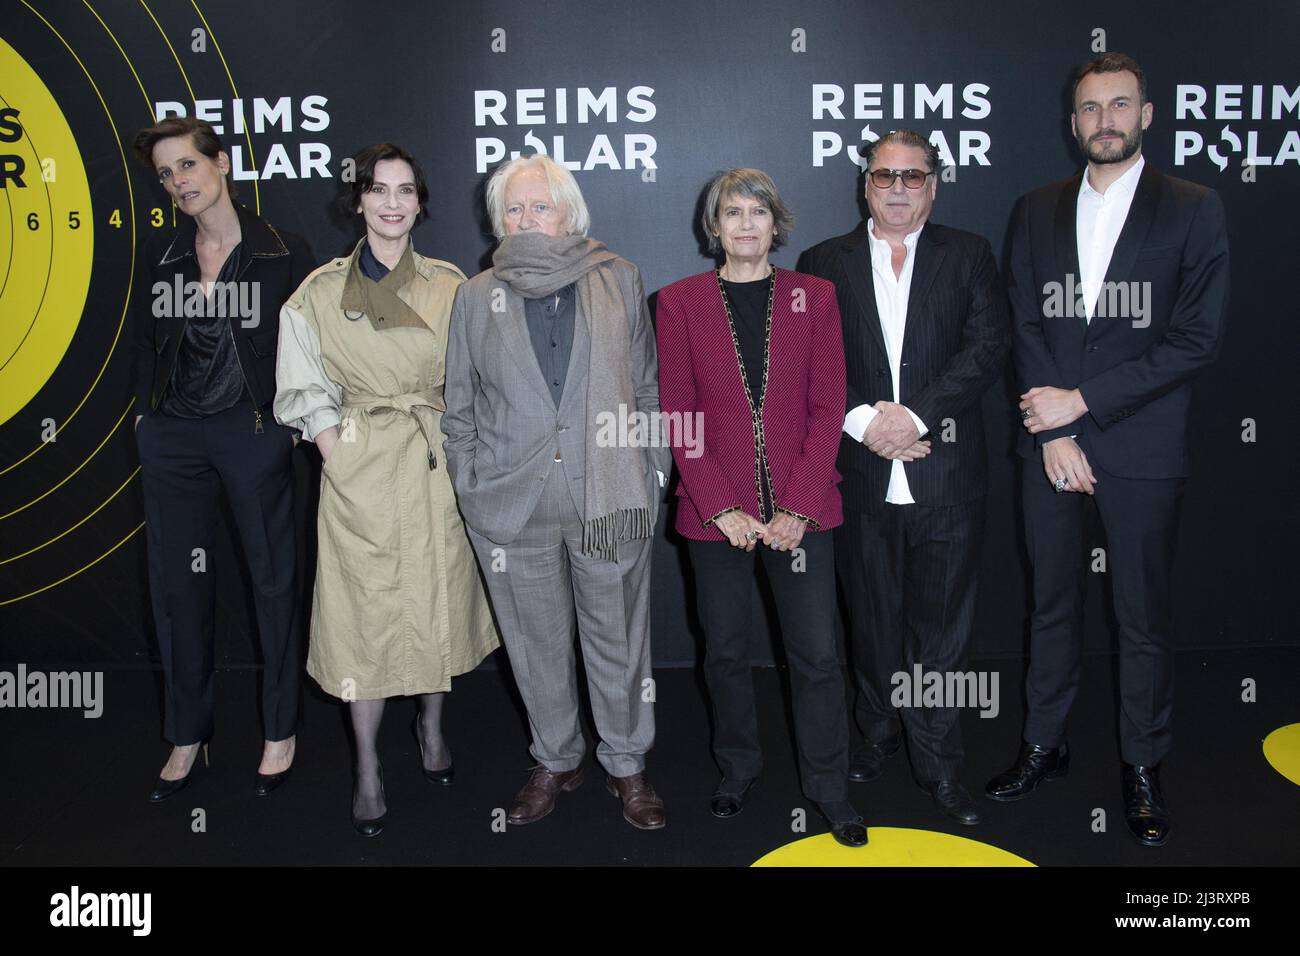 Helene Fillieres, Geraldine Pailhas, Niels Arestrup, Veronique Cayla,  Florent-Emilio Siri and Sebastien Marnier attending a photocall during the  2nd Reims Polar Film Festival in Reims, France on April 09, 2022. Photo by